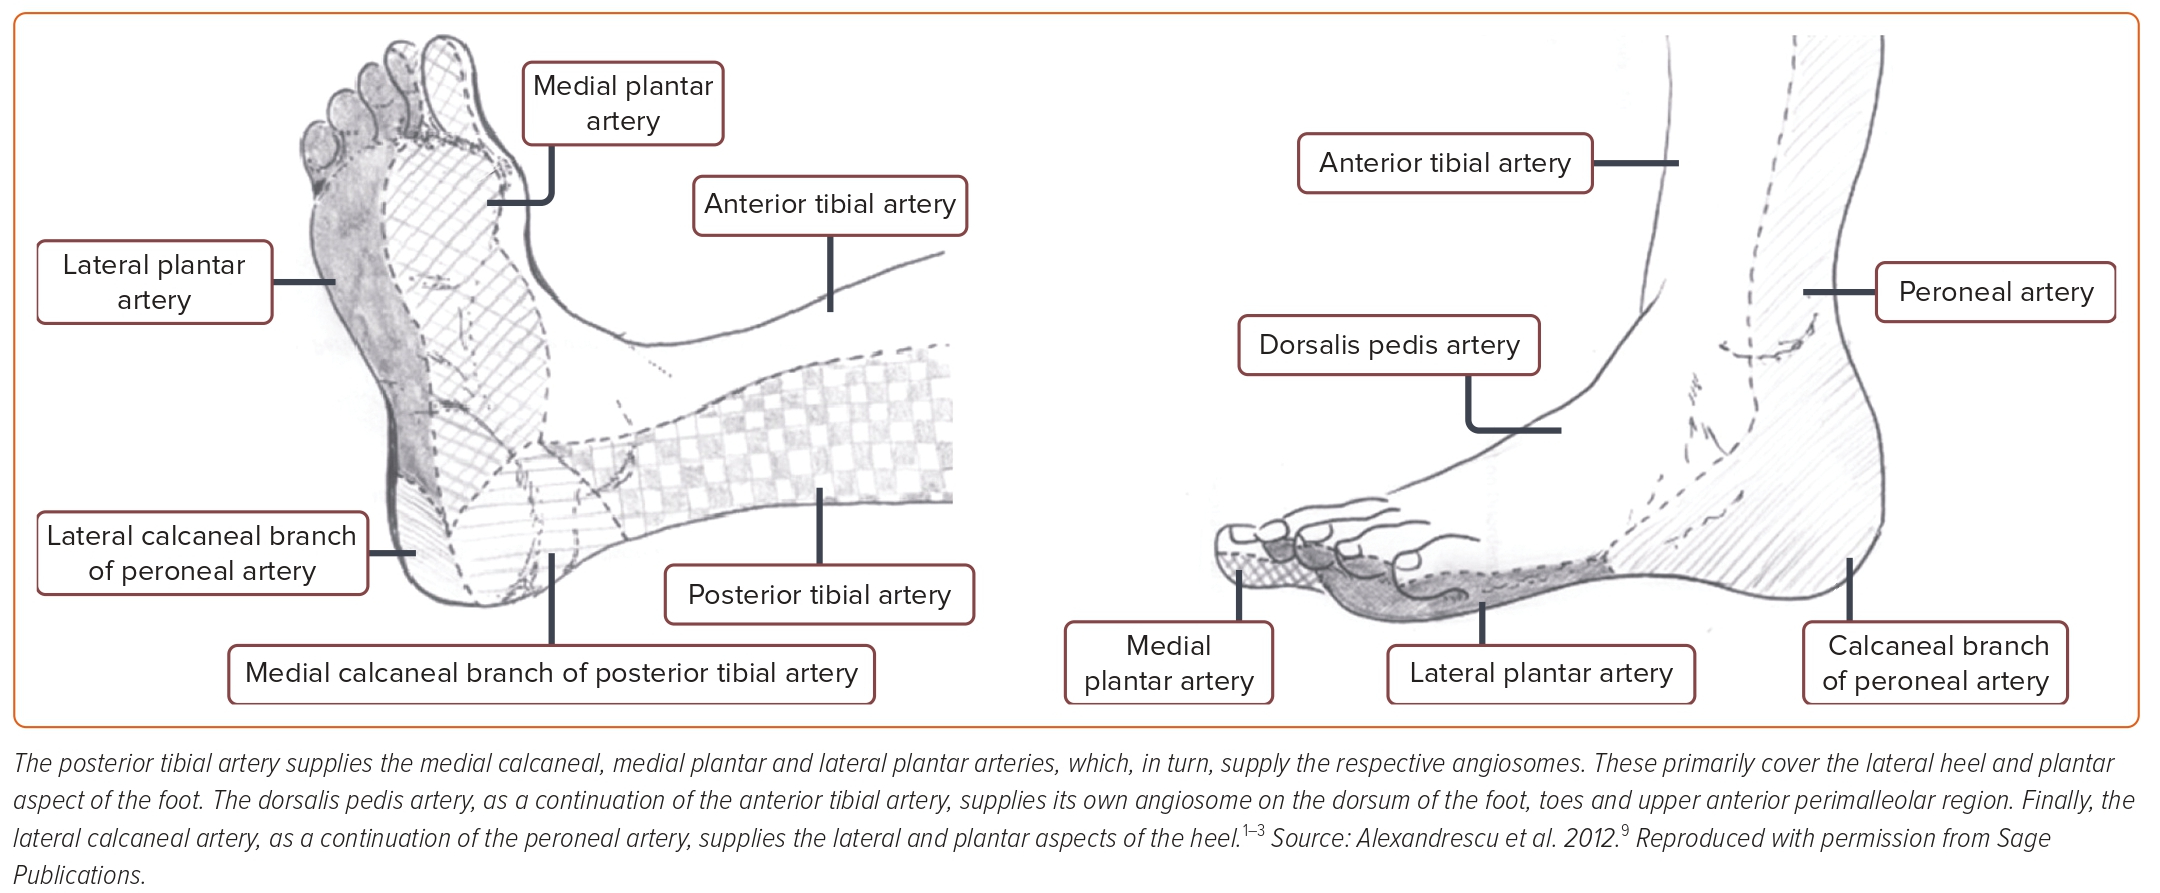 The Role of Targeted Infra-popliteal Endovascular Angioplasty to Treat Diabetic Foot Ulcers Using the Angiosome Model: A Systematic Review